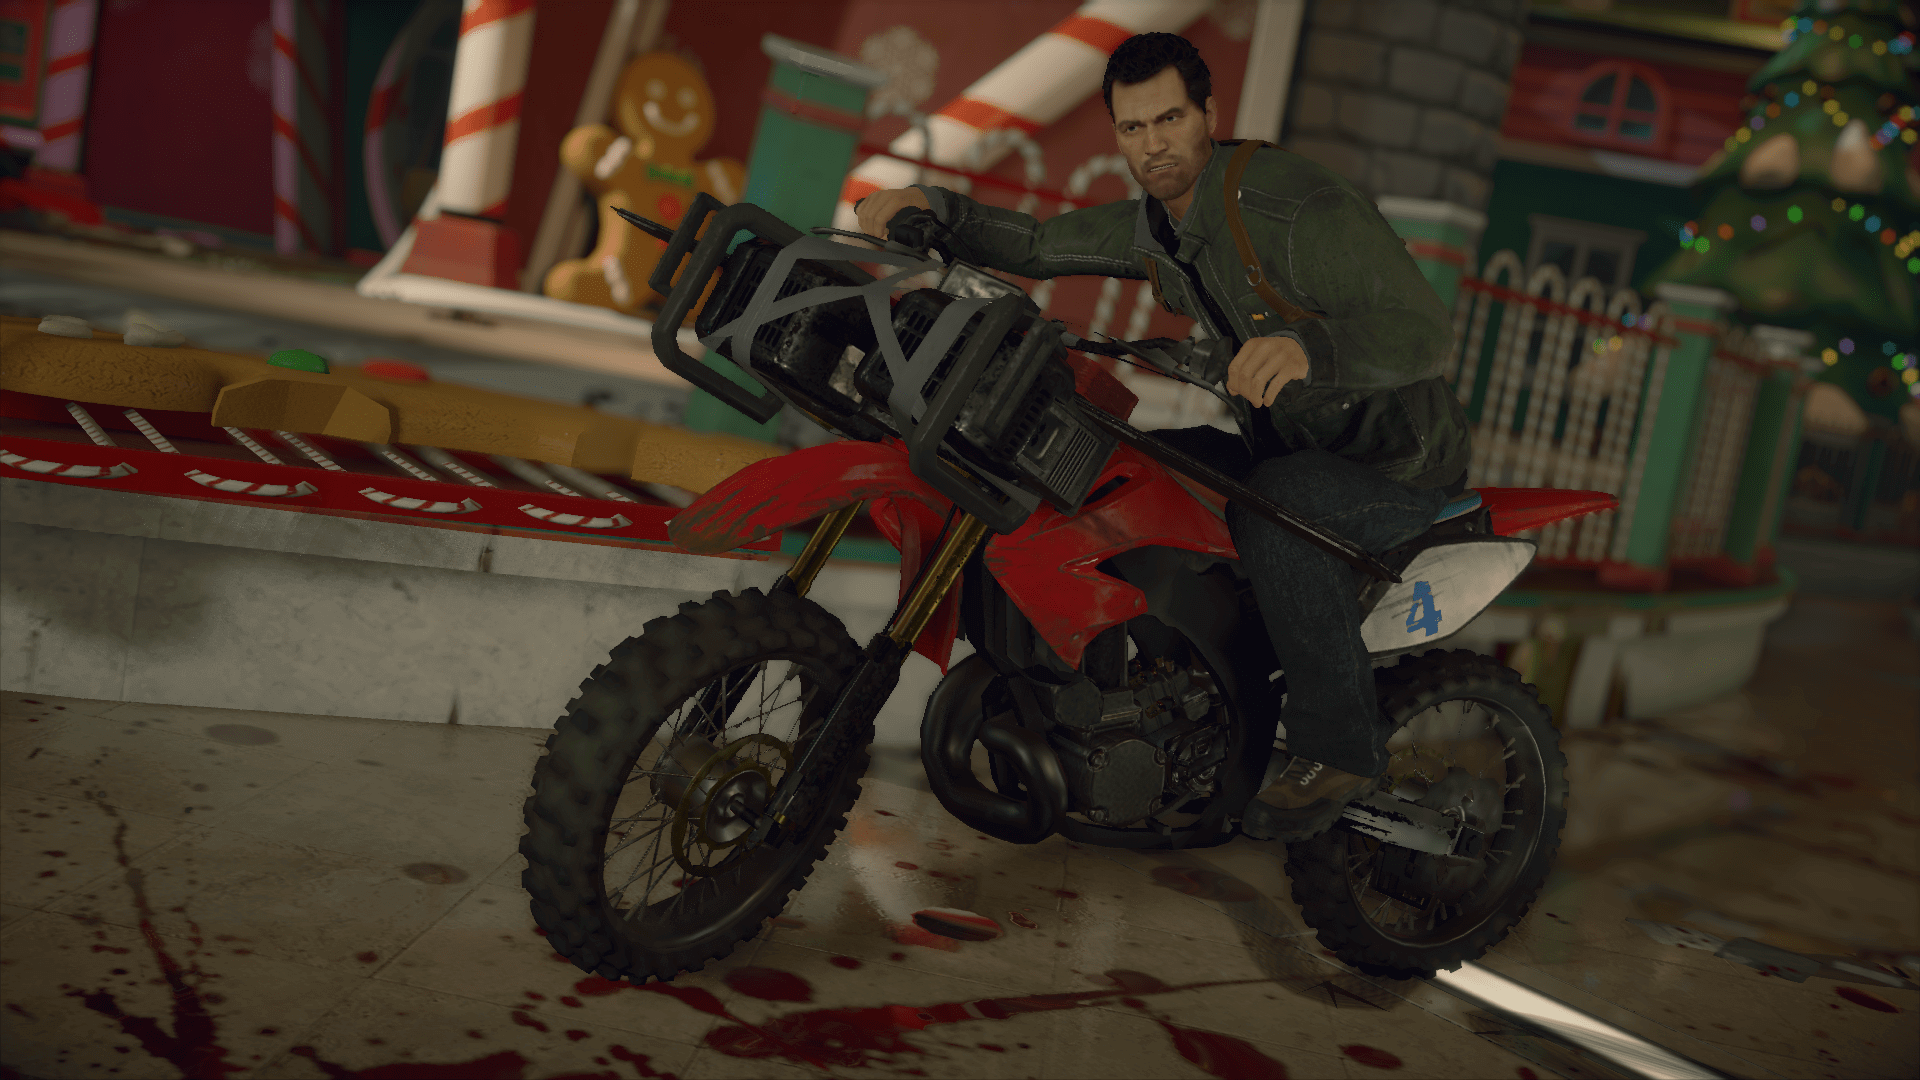 Tomorrow Dead Rising 4 Pre-Order Content Will be Available to Purchase1920 x 1080